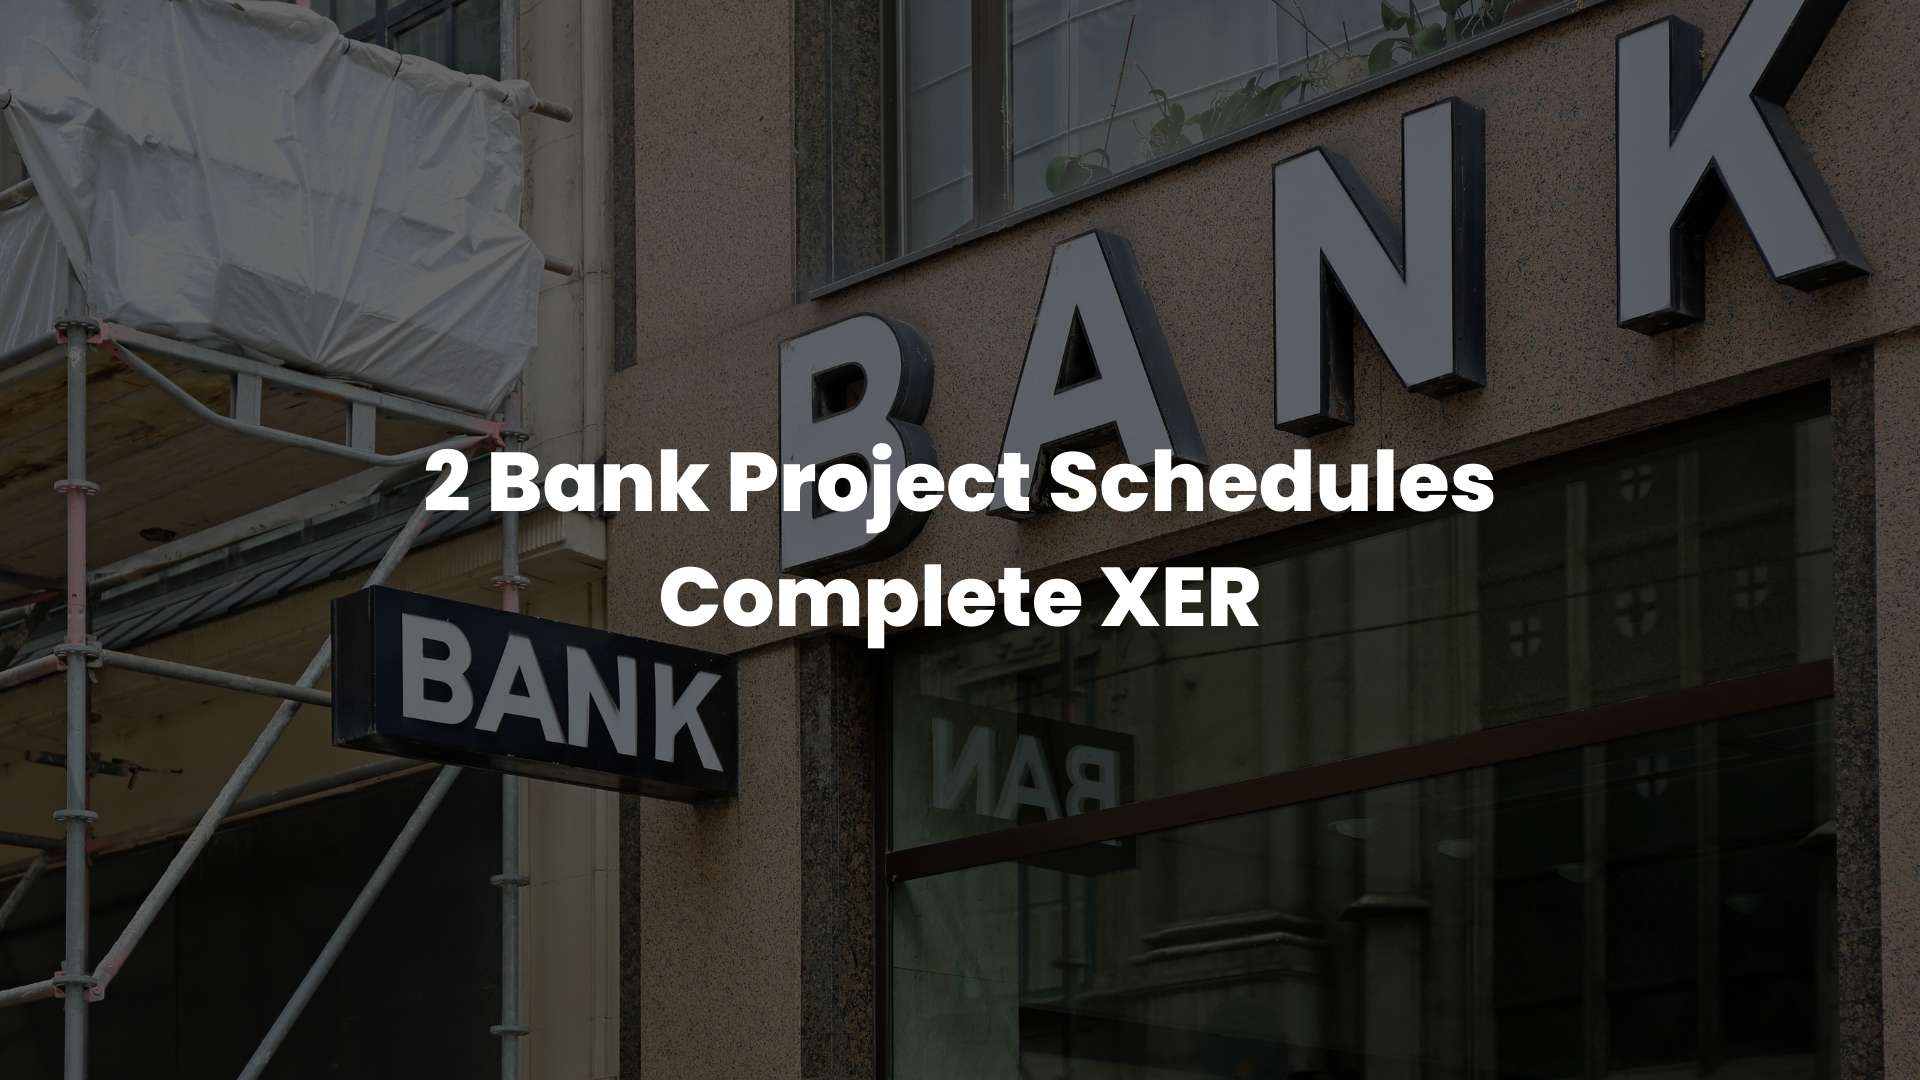 2 Bank Project Schedules Complete XER